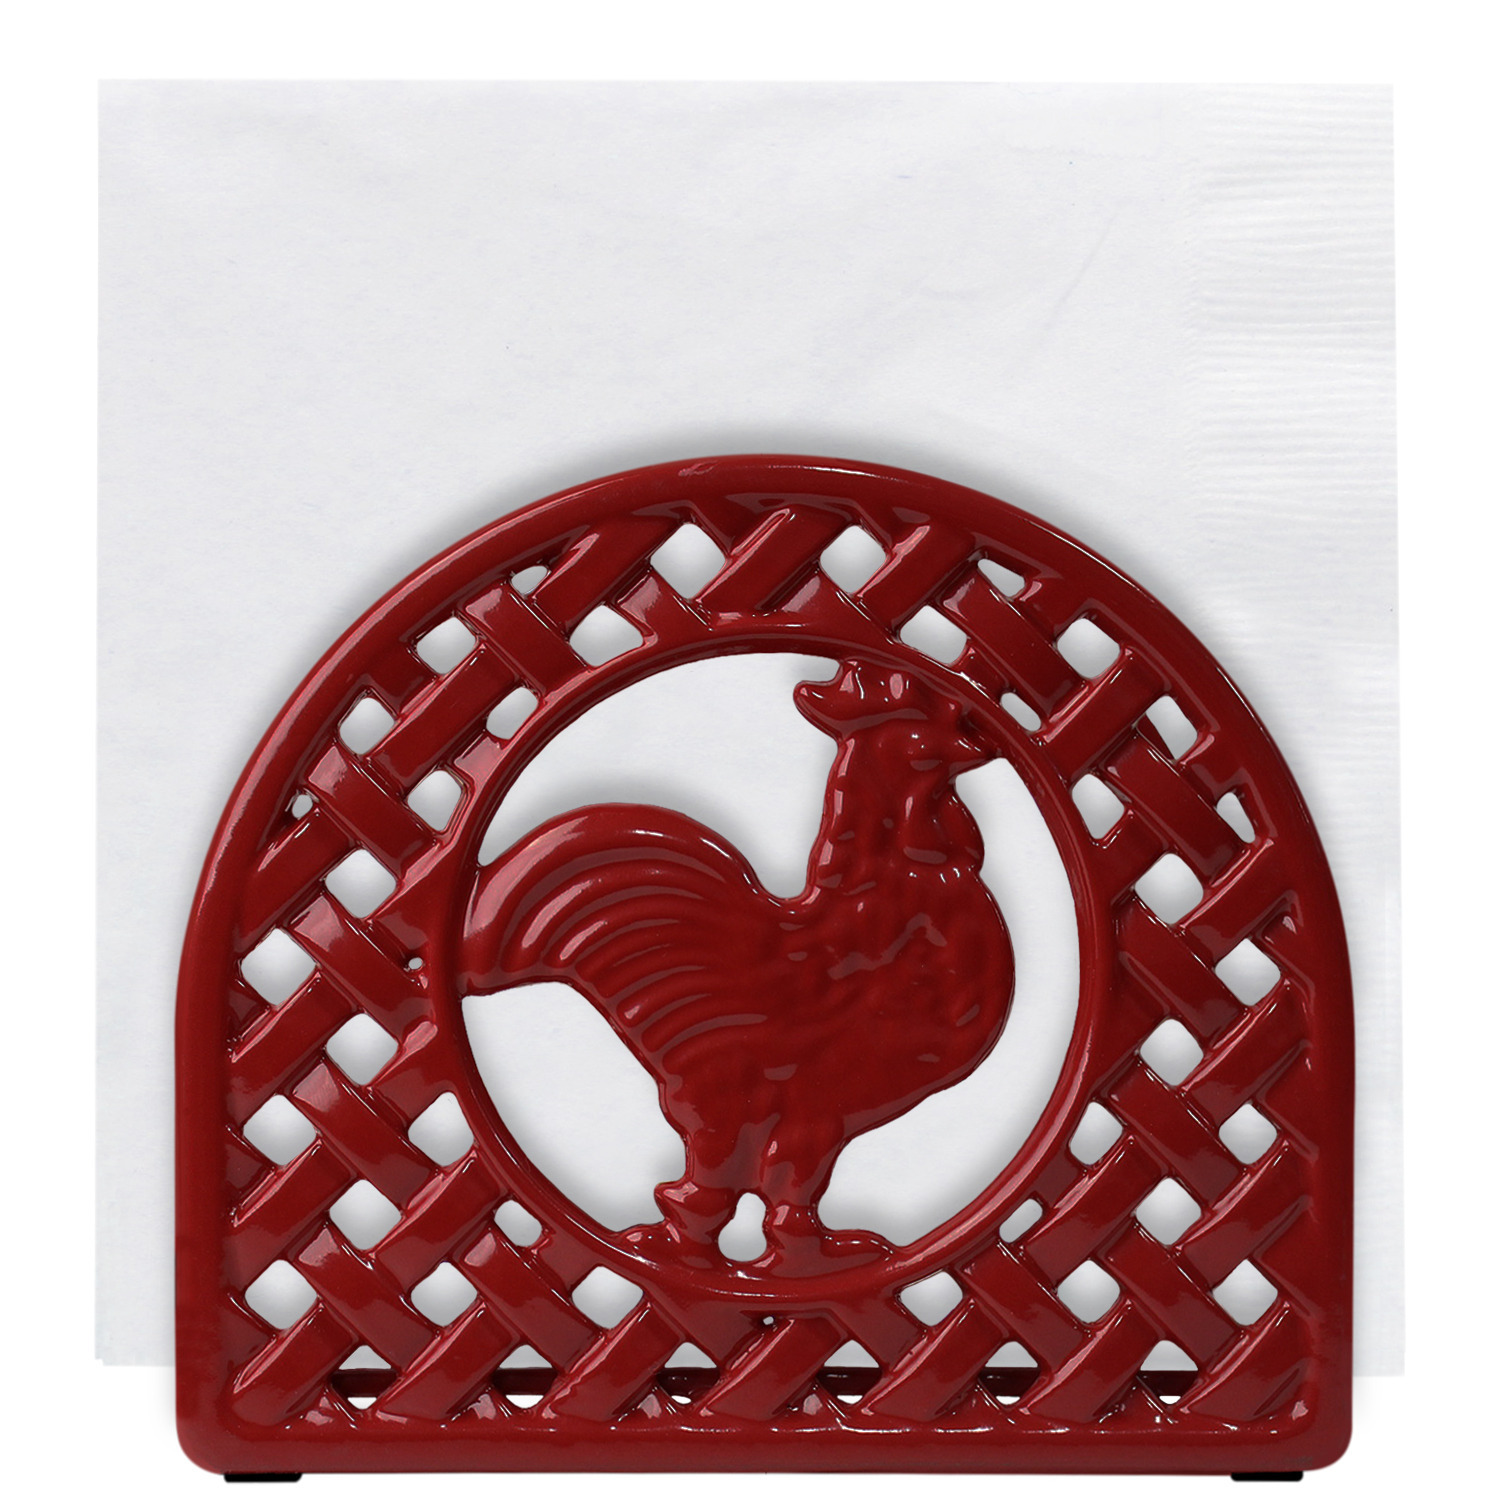 Blue Donuts Cast Iron Rooster Napkin Holder (Red)